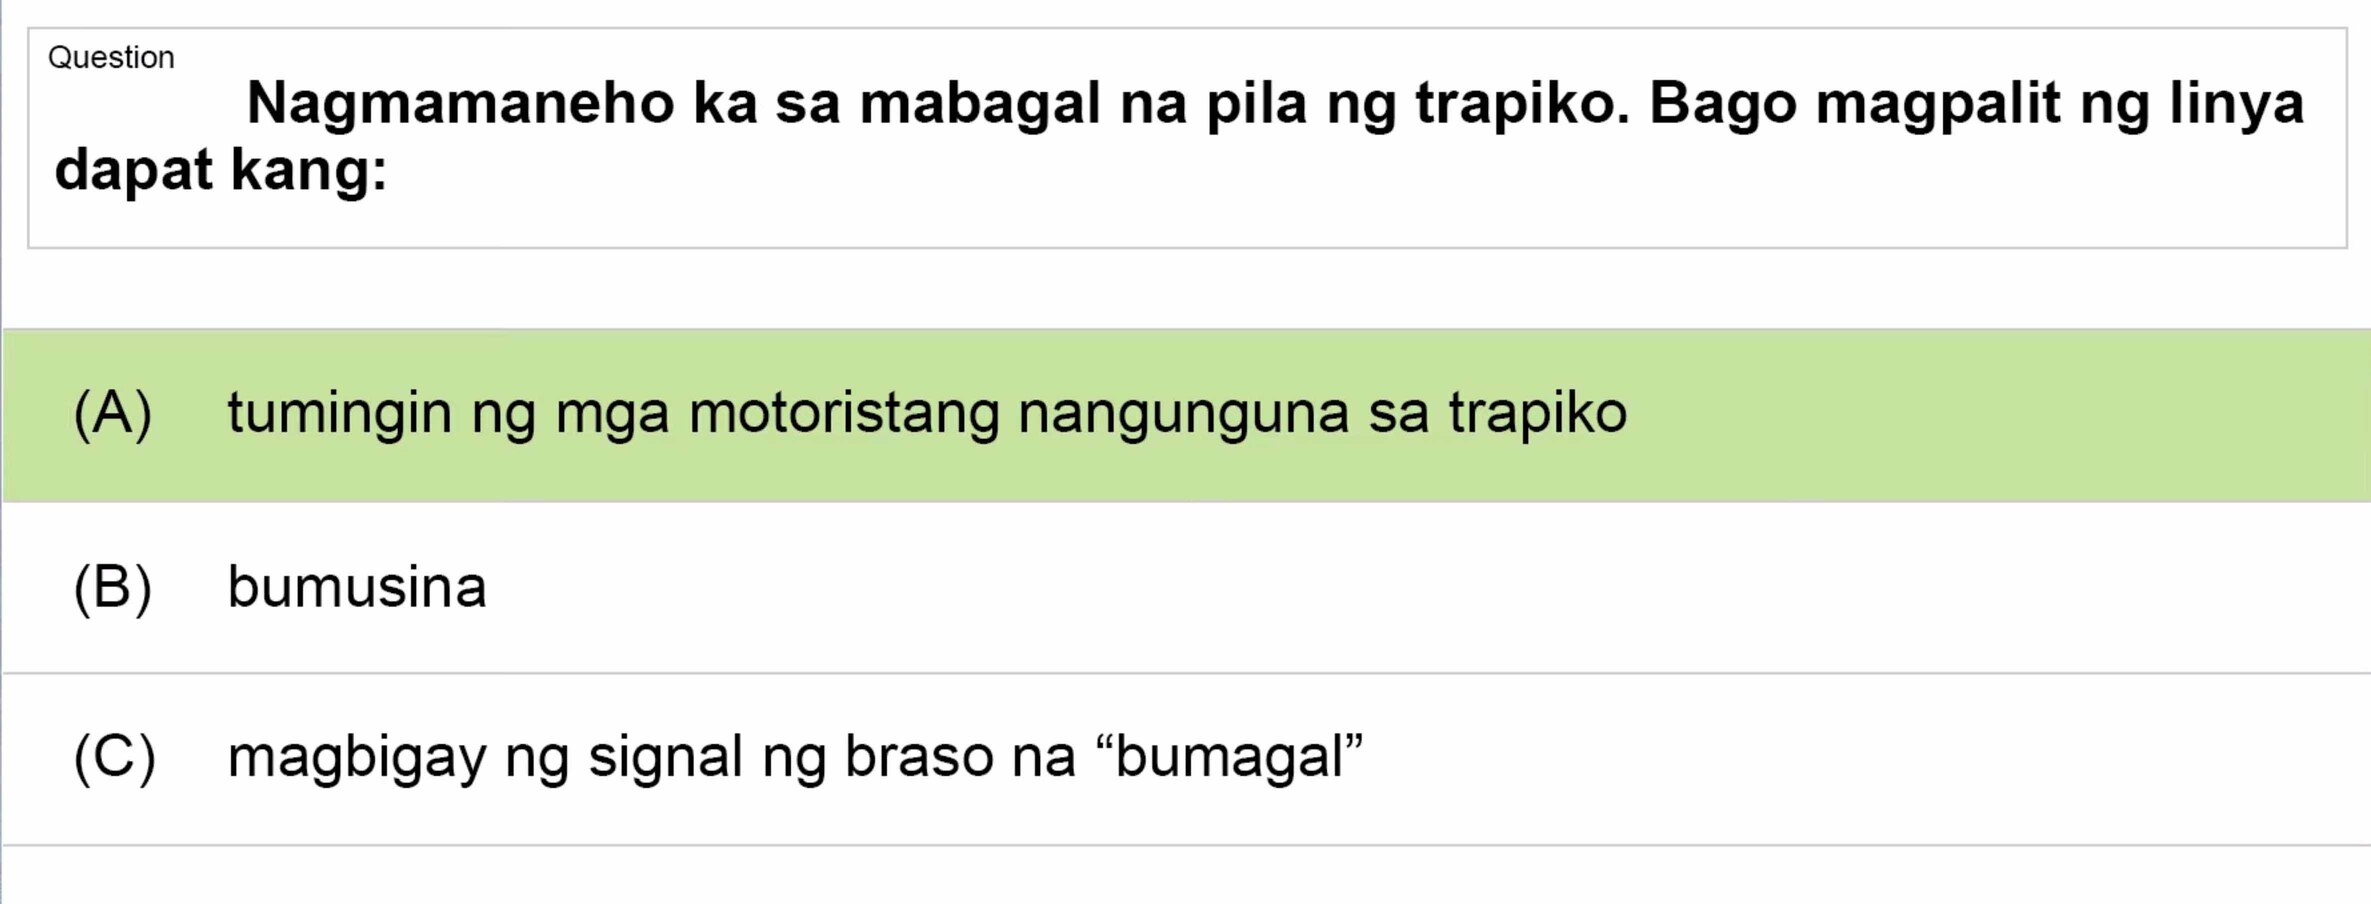 LTO Tagalog non professional exam reviewer light vehicle 3 (51)